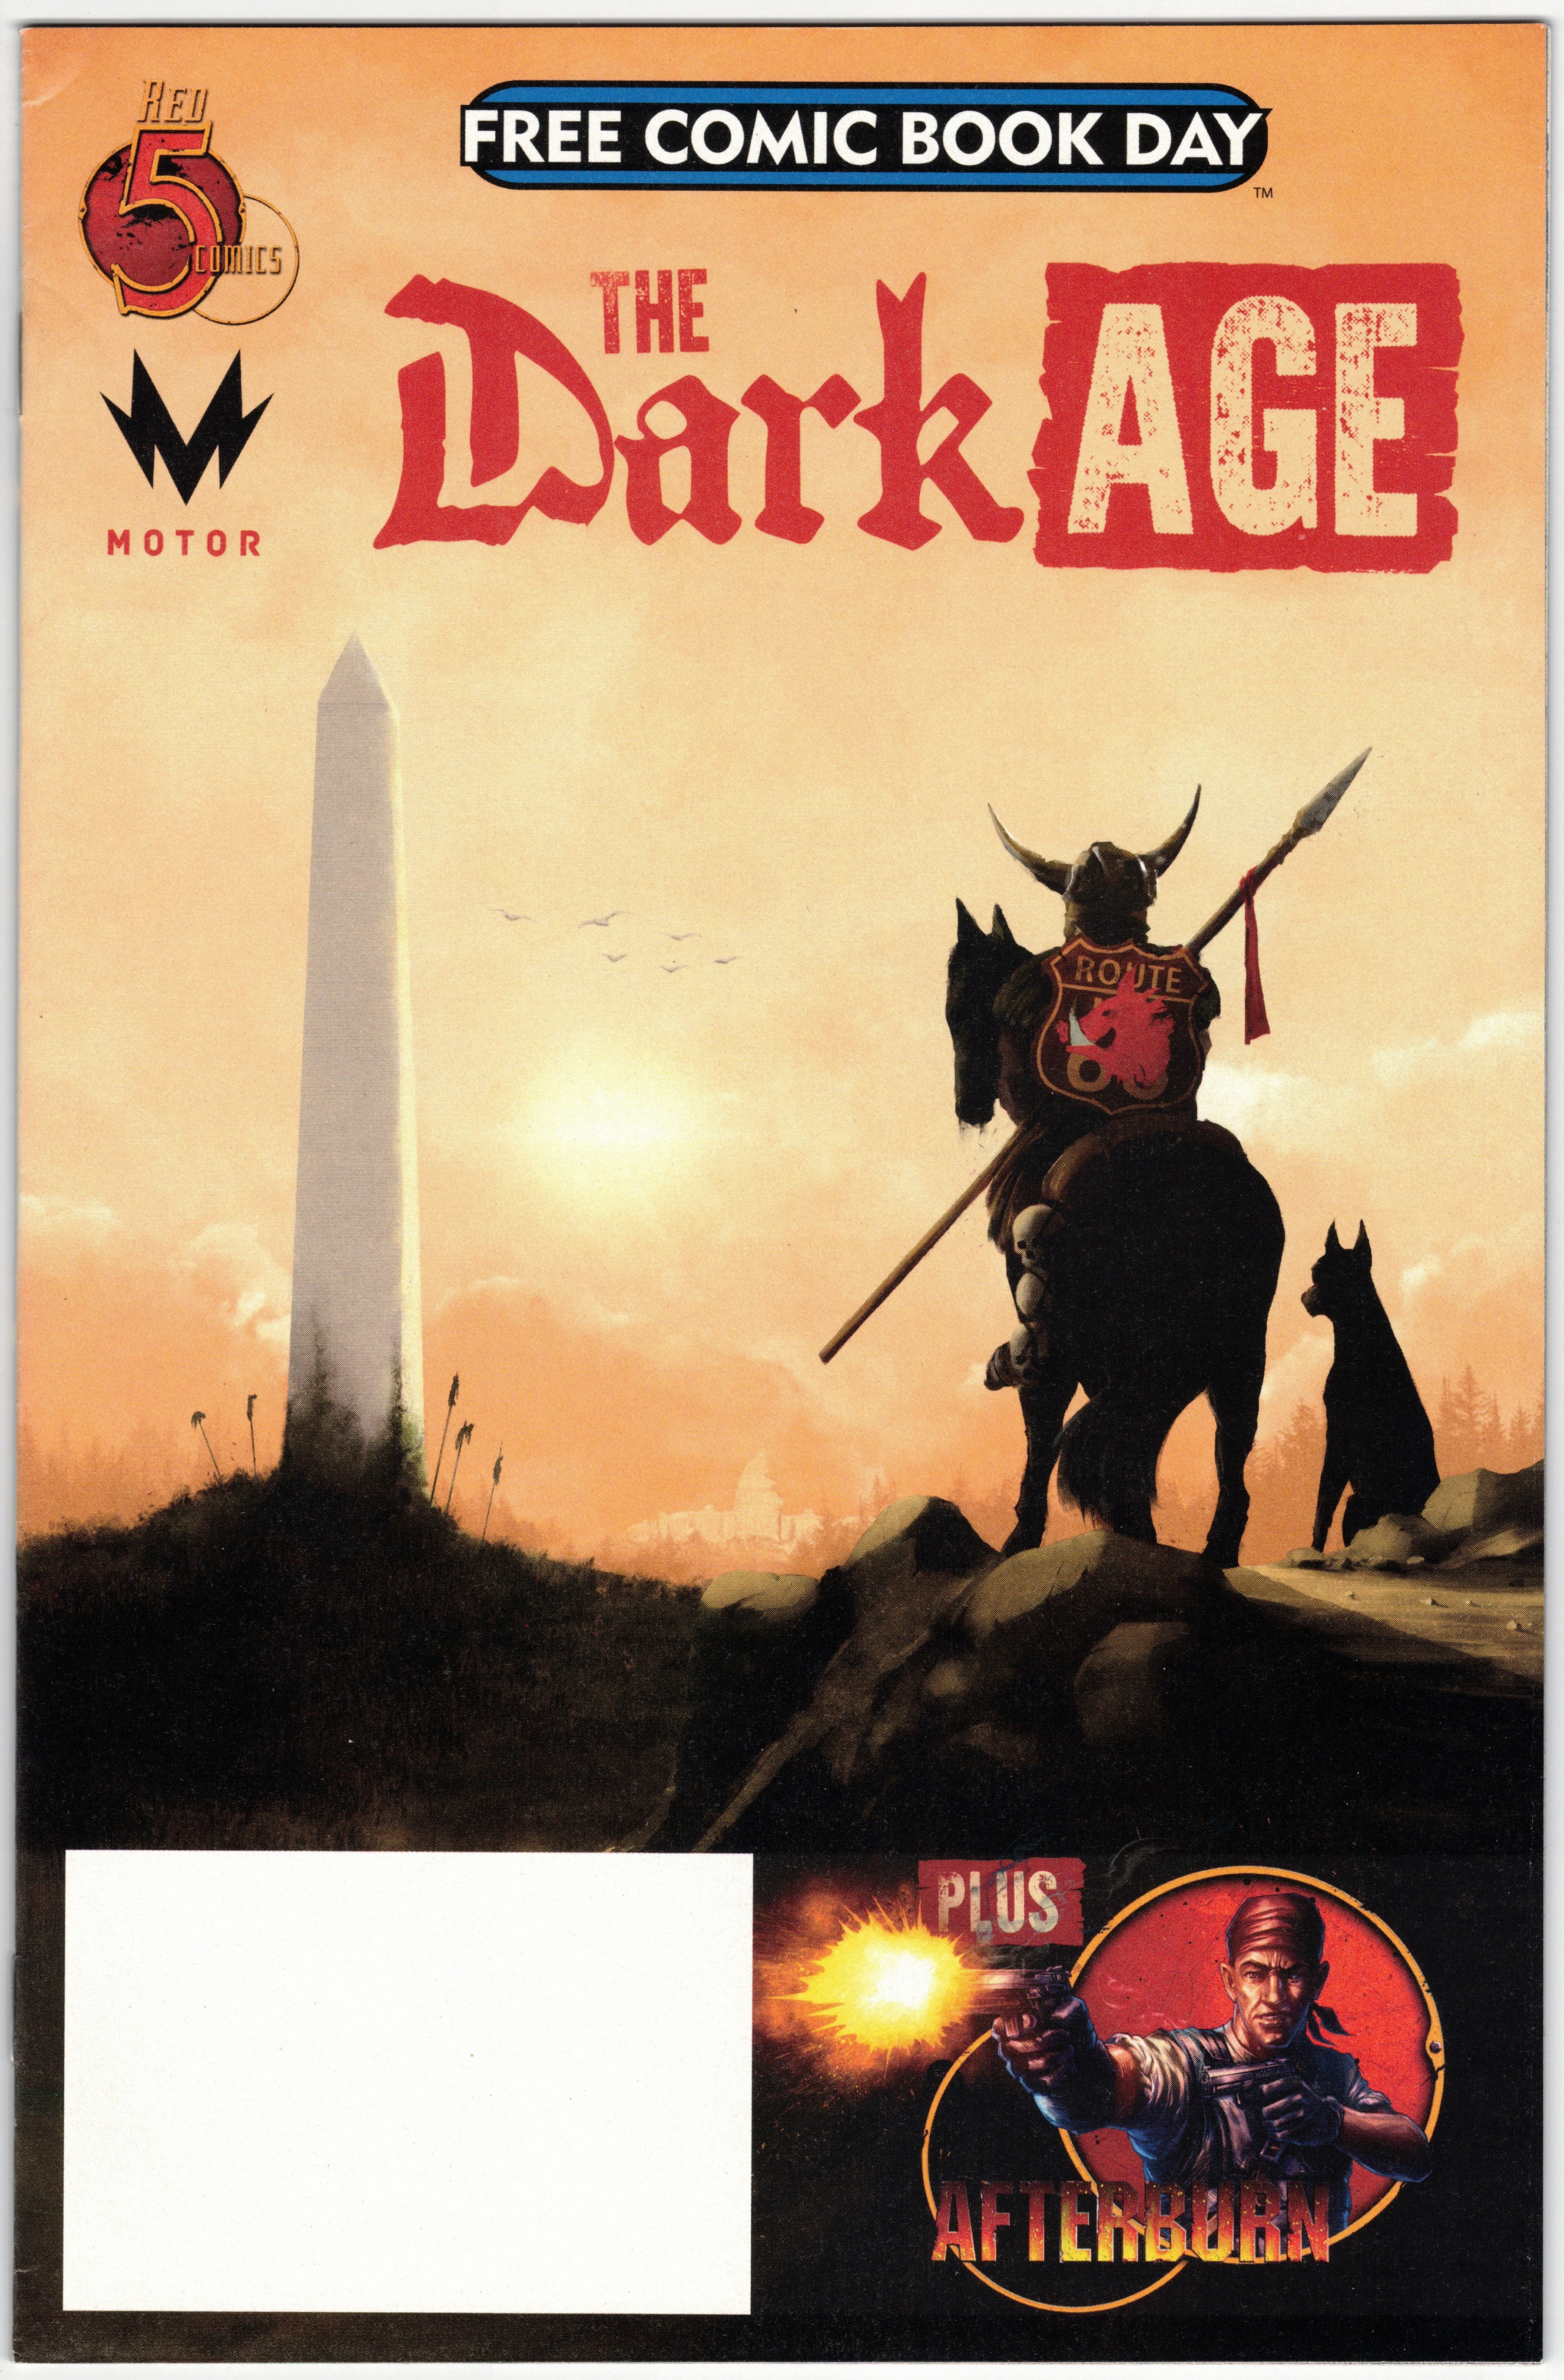 Photo of Free Comic Book Day 2019 (The Dark Age & Afterburn) (2019) Issue 1 - Near Mint Comic sold by Stronghold Collectibles